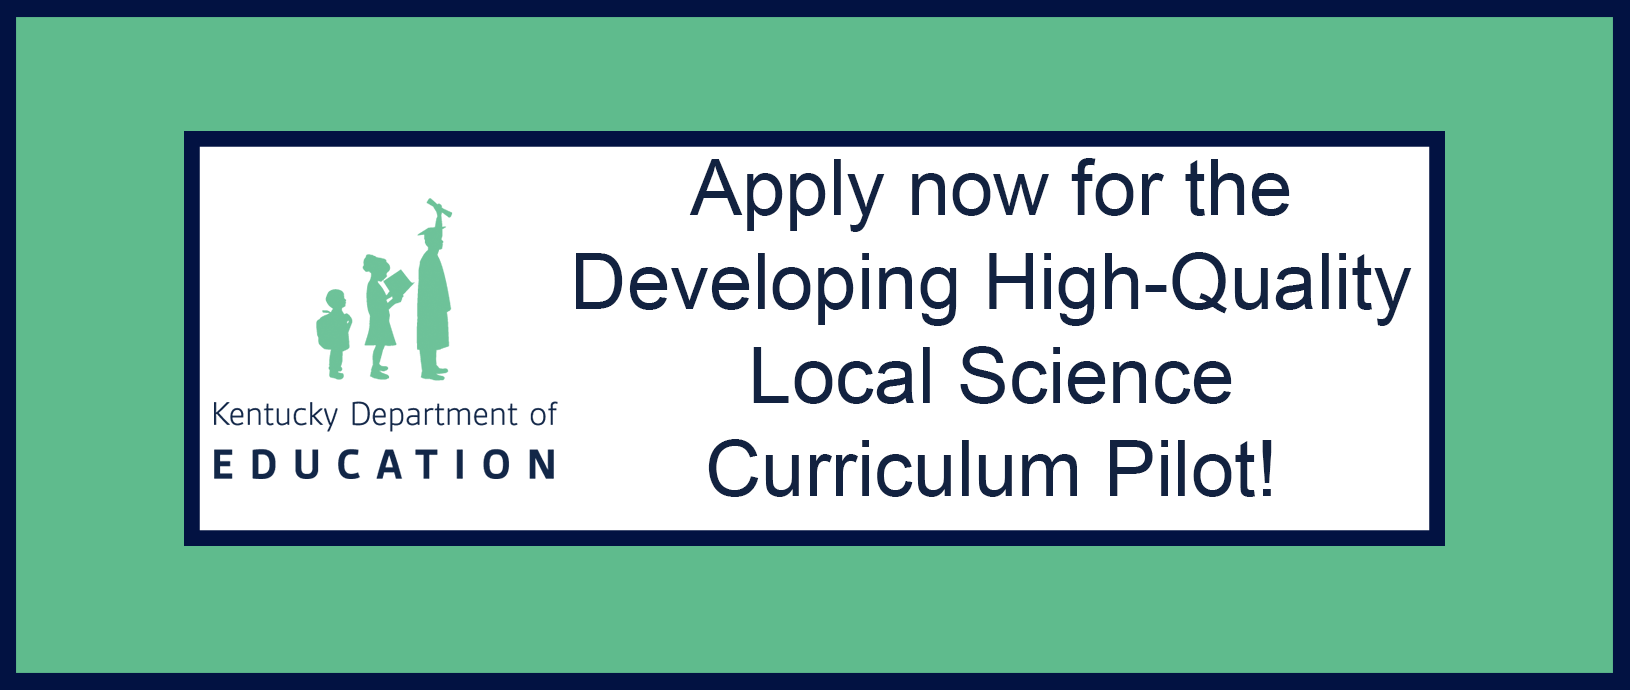 Apply now for the Developing High-Quality Local Science Curriculum Pilot!